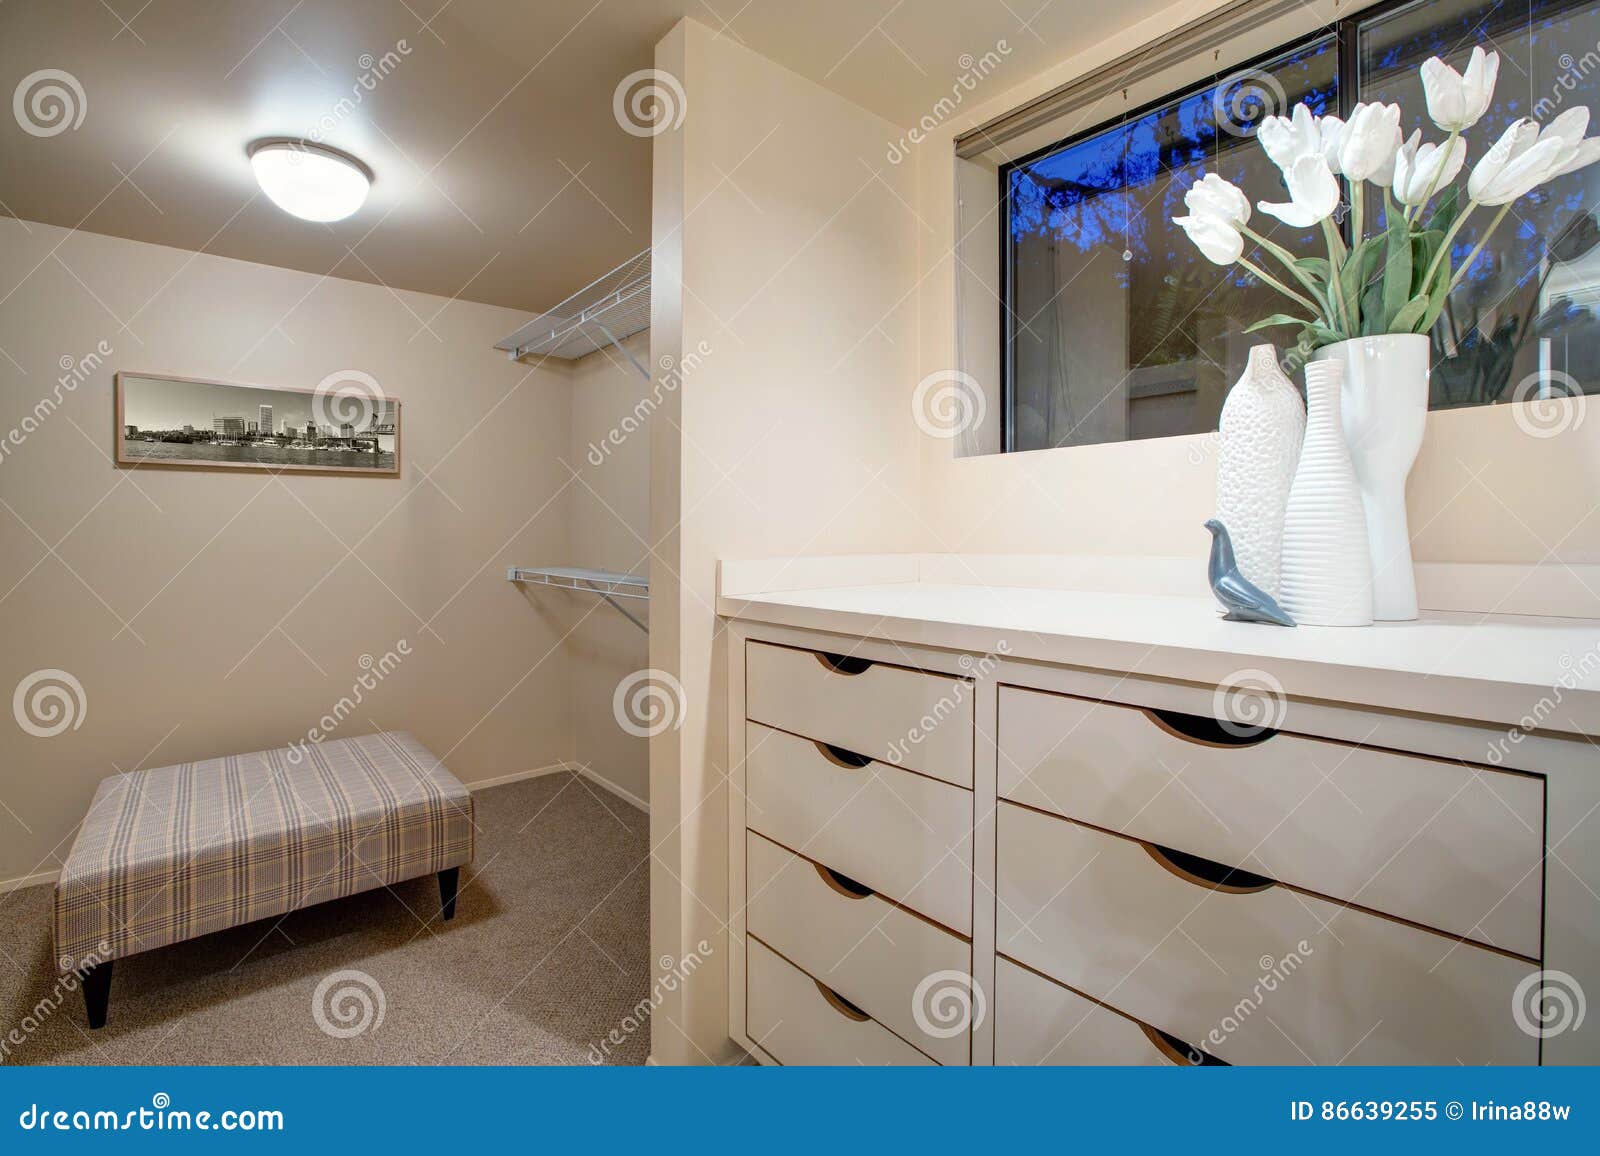 Narrow Walk In Closet Features Built In Drawers Stock Image